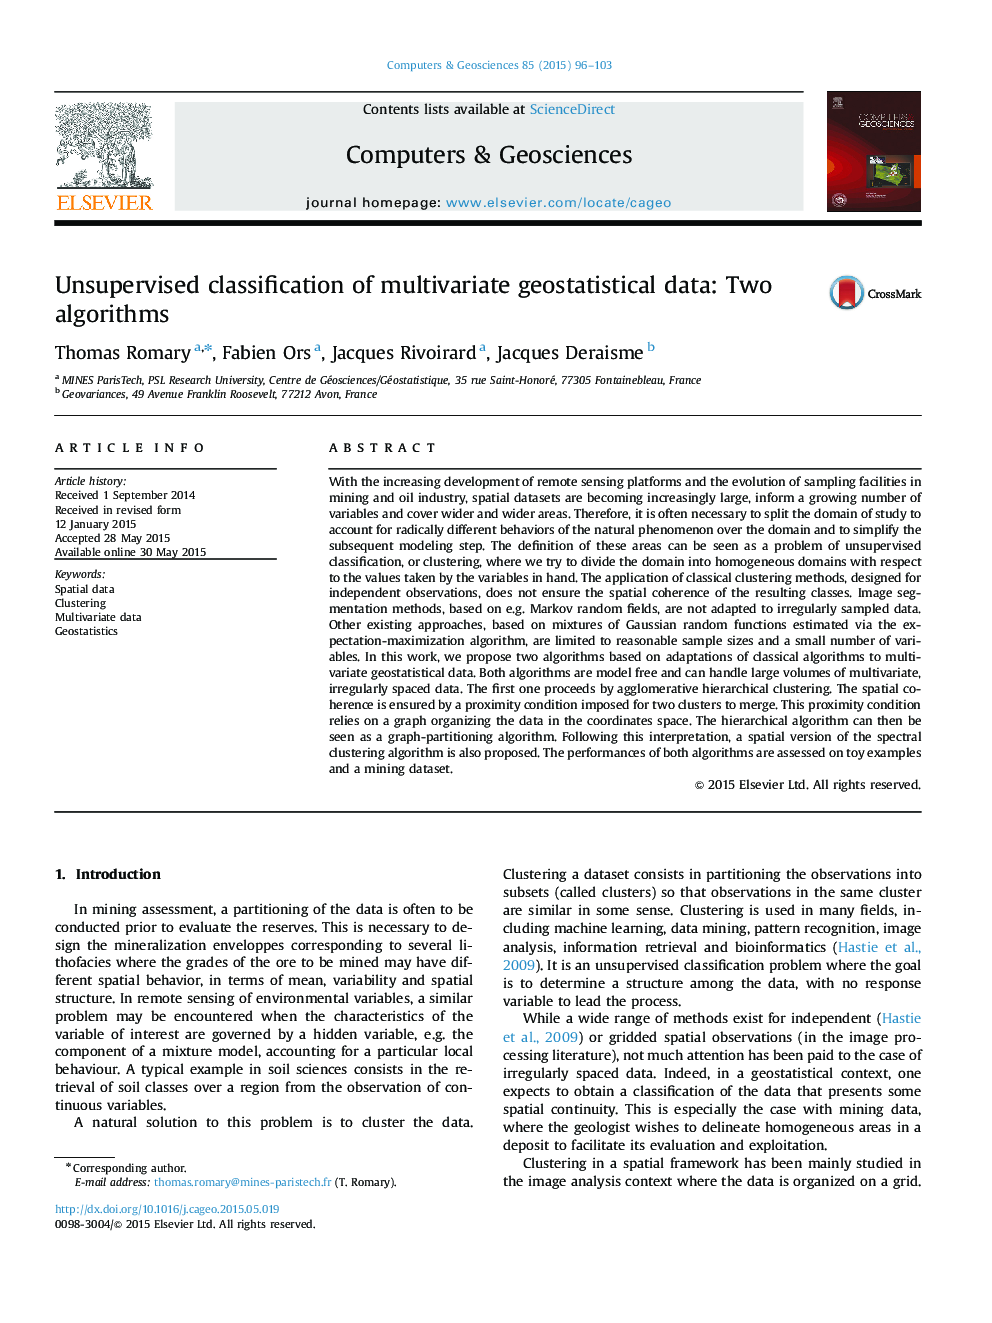 Unsupervised classification of multivariate geostatistical data: Two algorithms